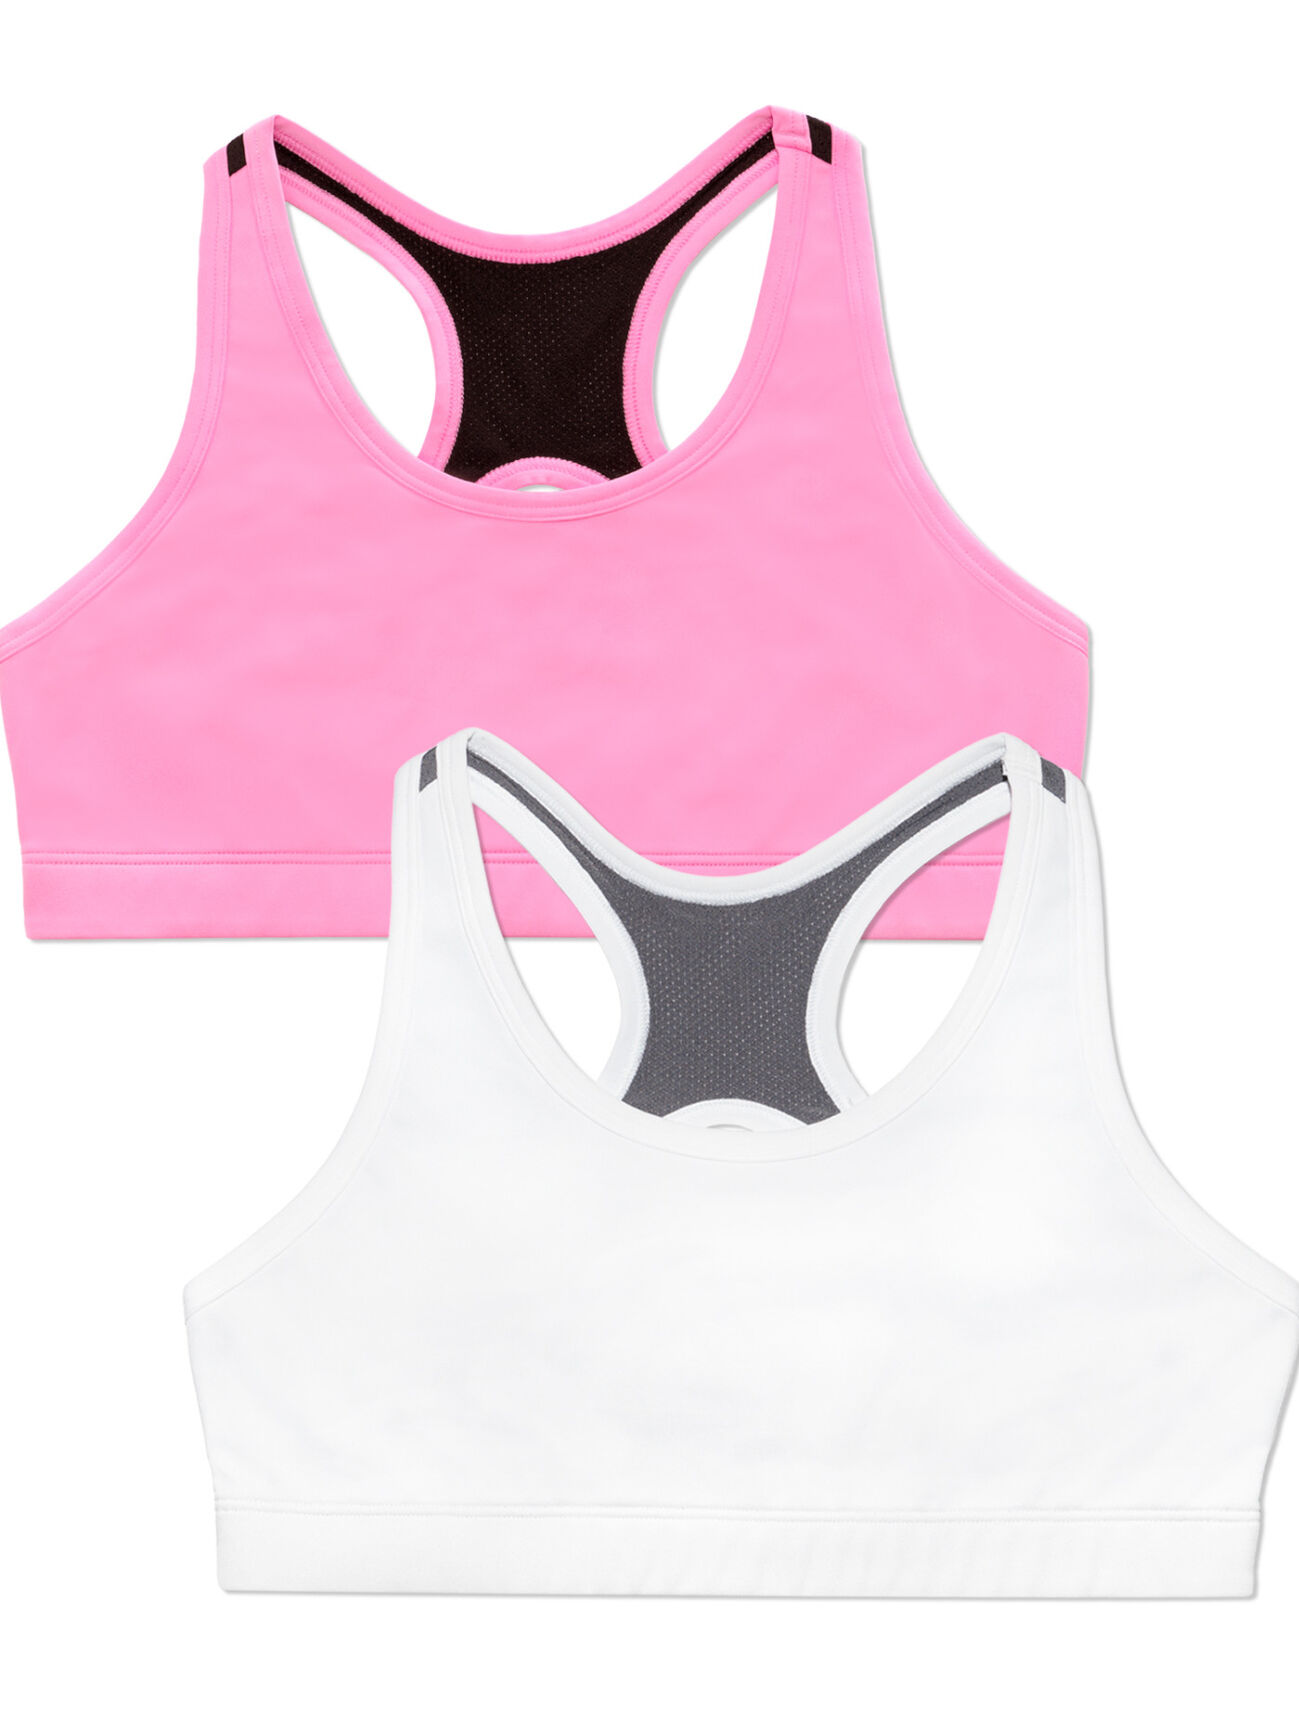 Girl's Sport Bra for 12 Years Old